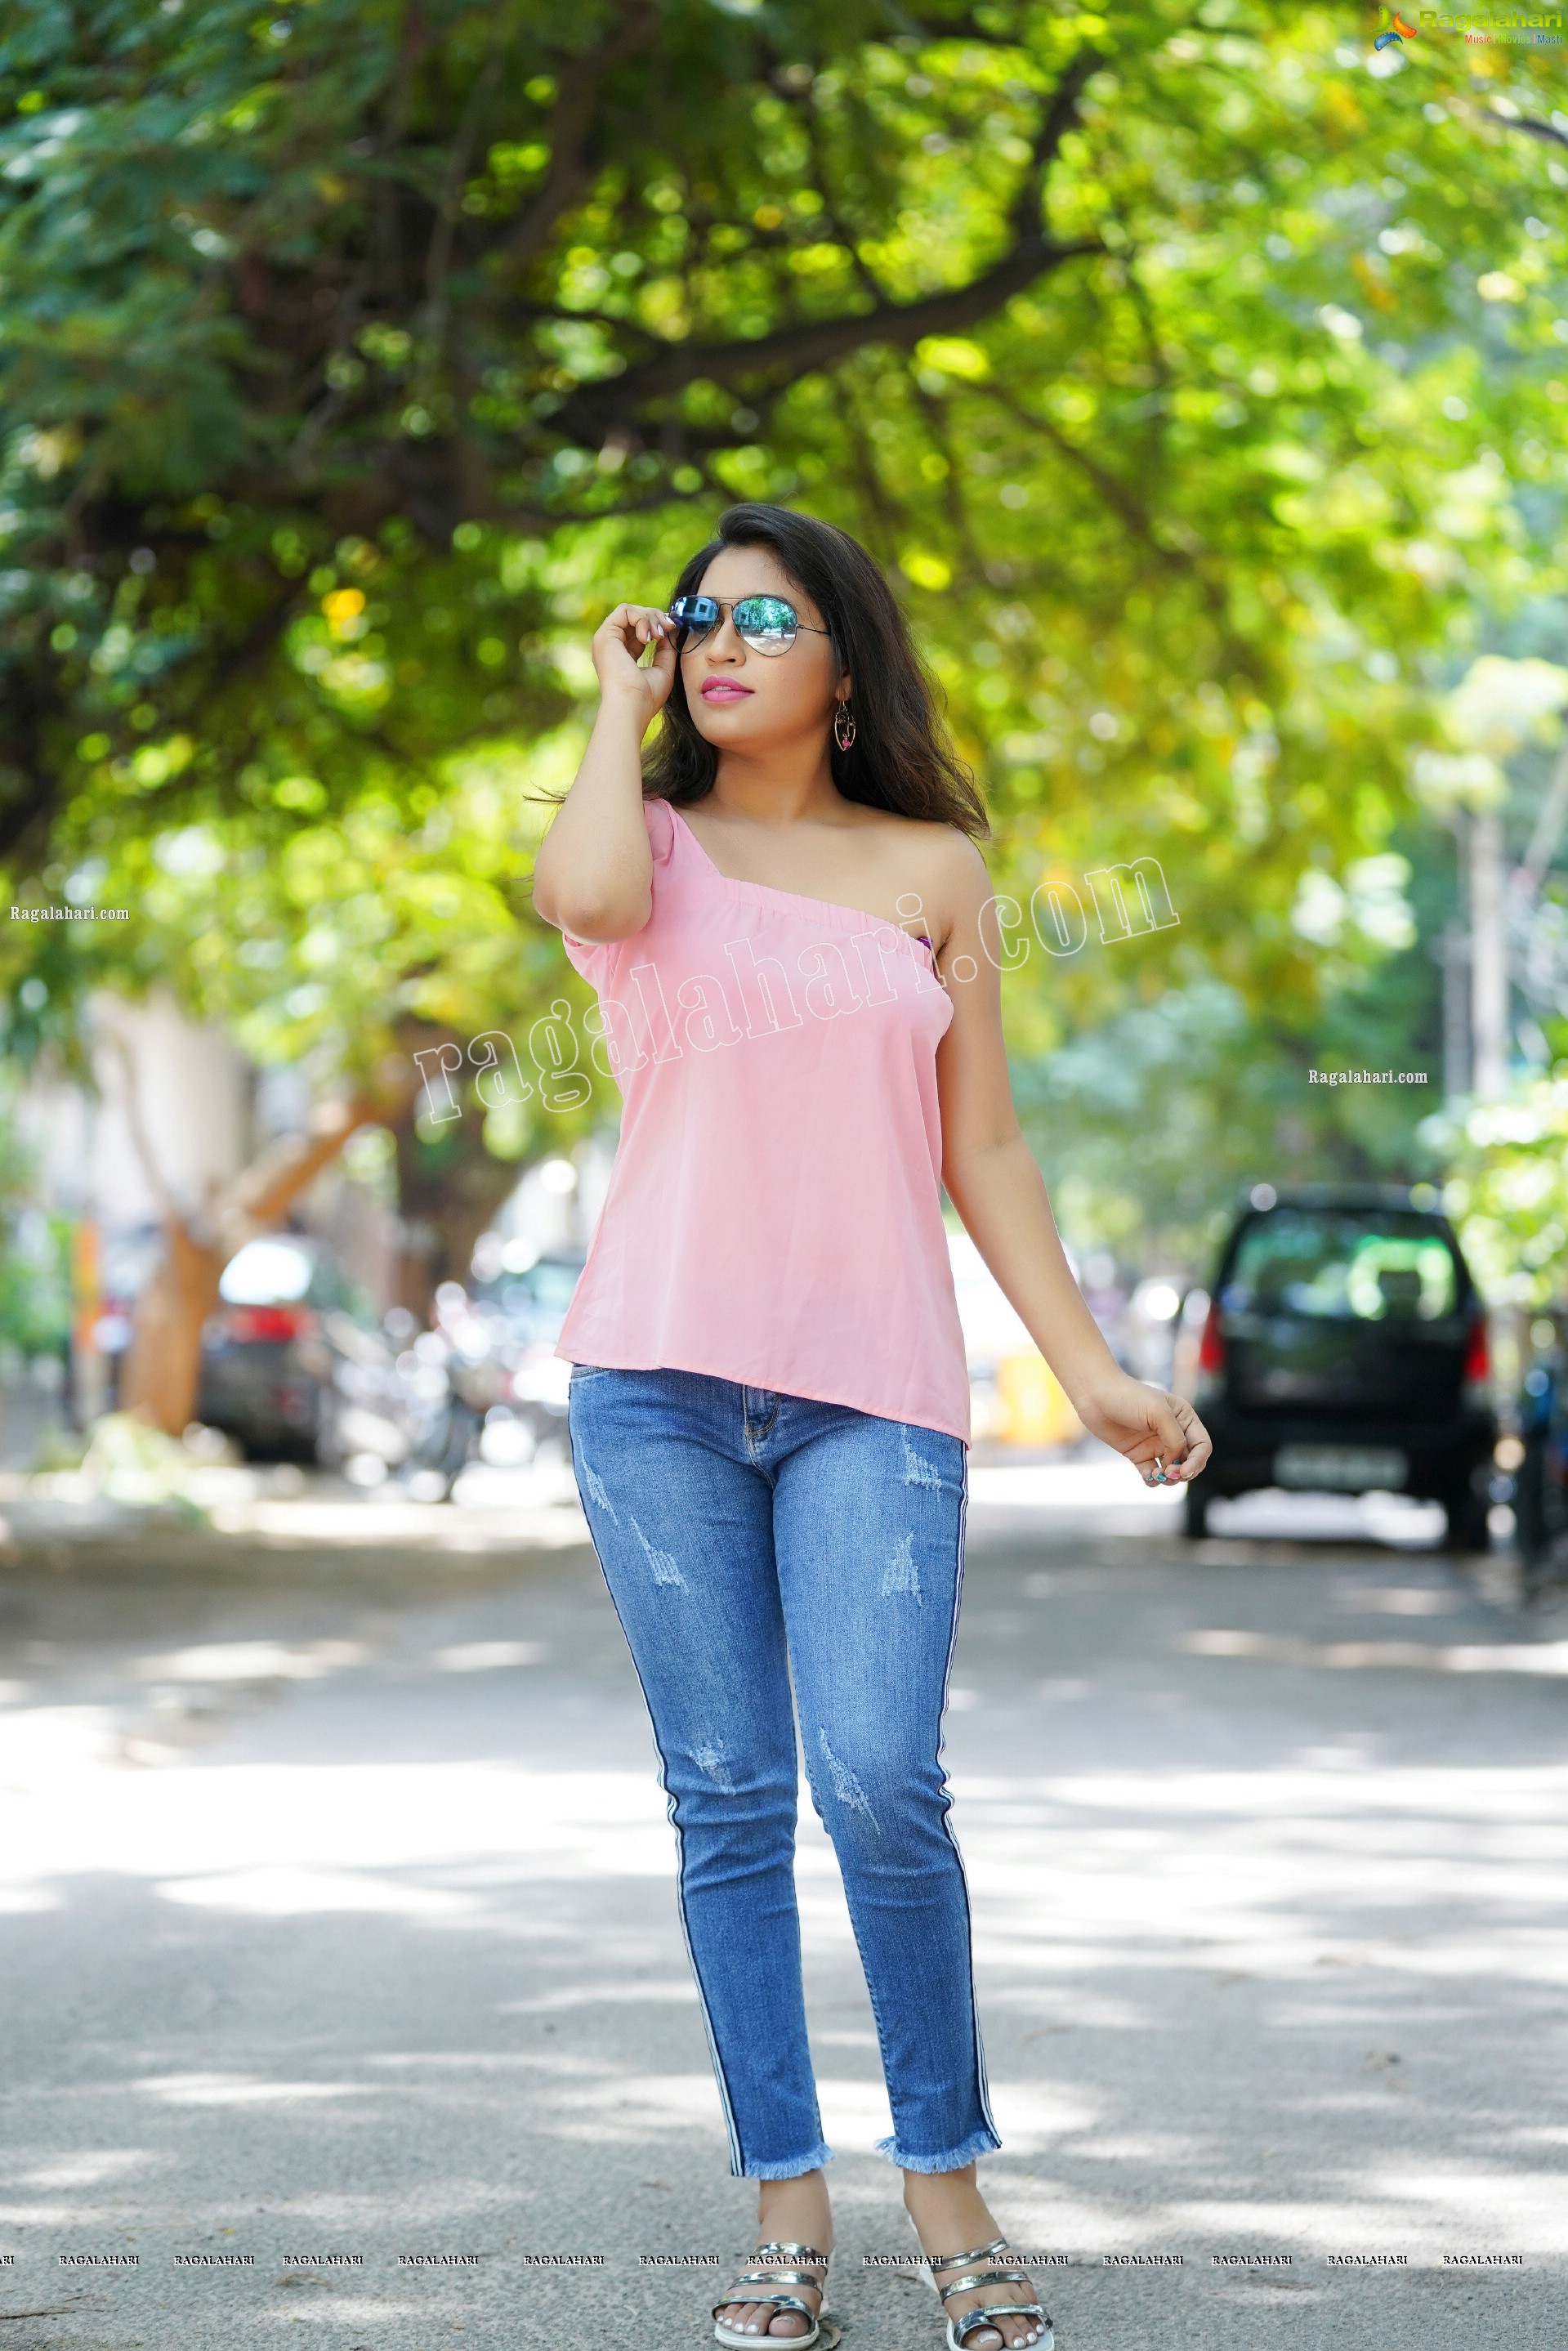 Honey Royal in Pink One-Shoulder Top and Jeans, Exclusive Photoshoot